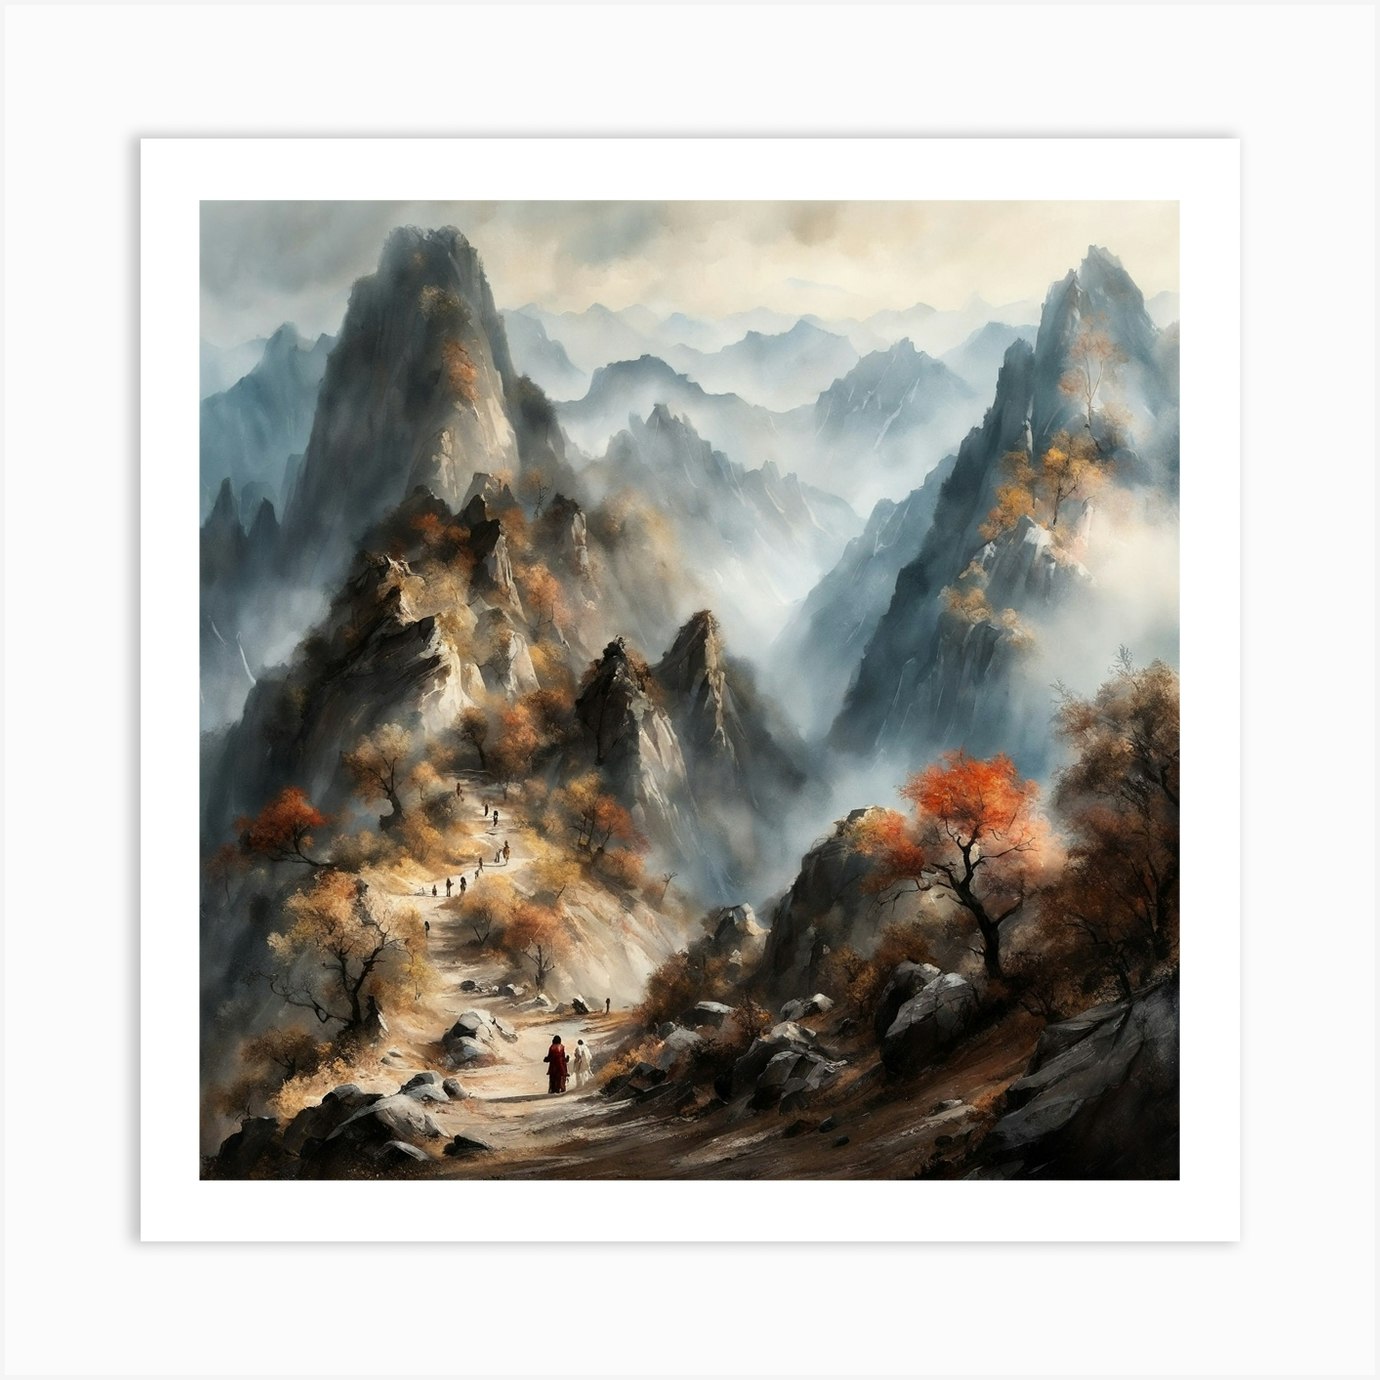 Chinese Mountains Painting 1026008, 96cm x 180cm(38〃 x 71〃)